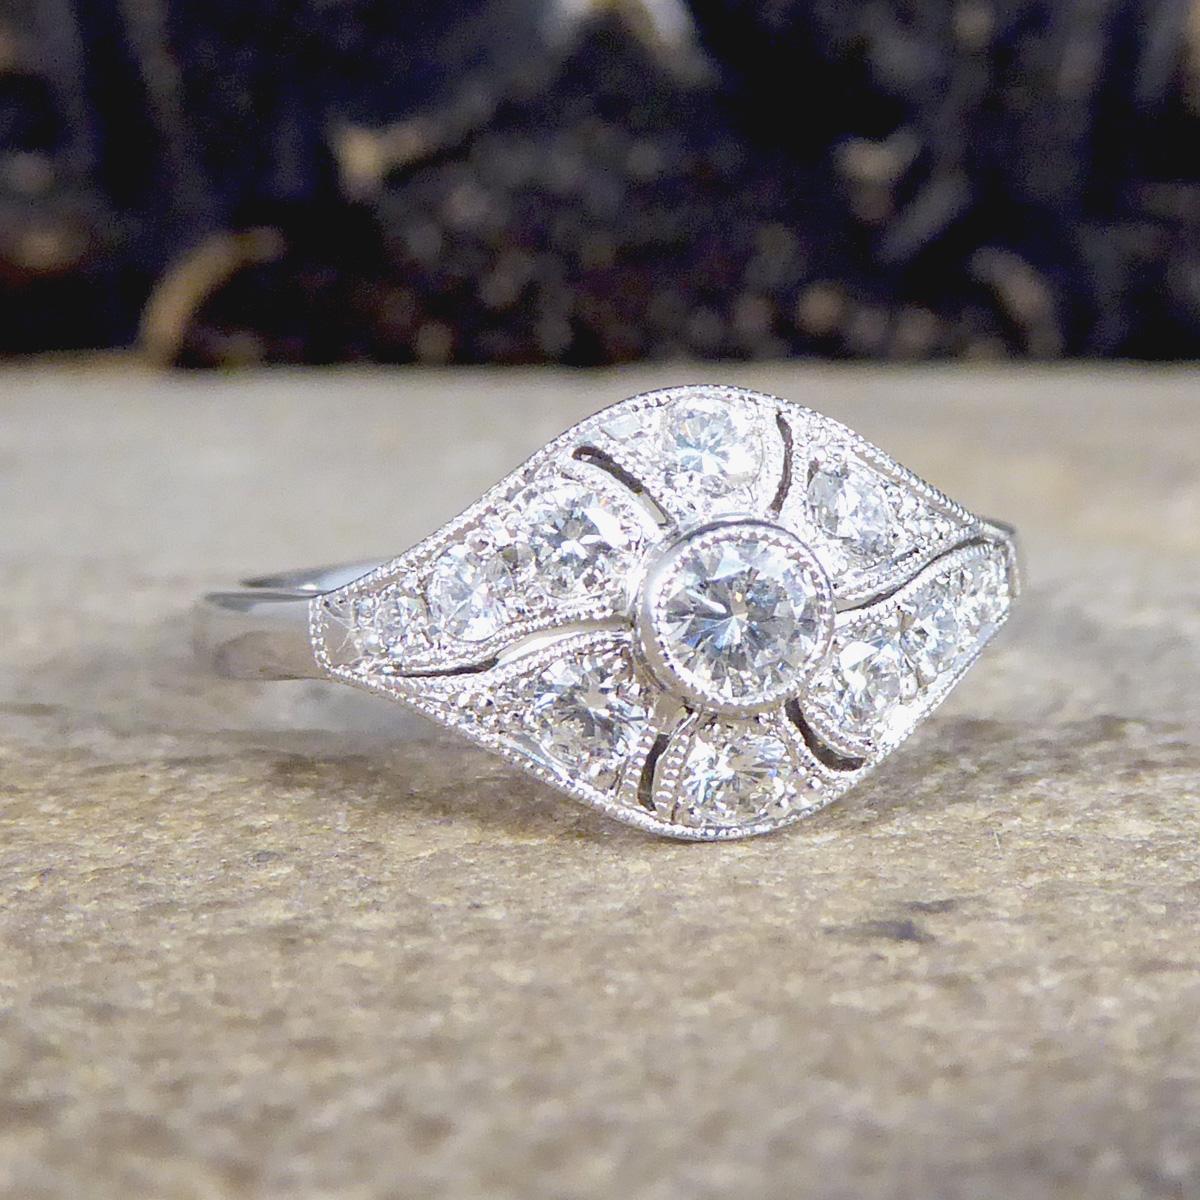 This stunning ring has been hand crafted and is new and never worn. It has been designed and carefully crafted to resemble an Art Deco style ring with a collar set Brilliant Cut Diamond in the centre with a milgrain edge surrounded by an array of